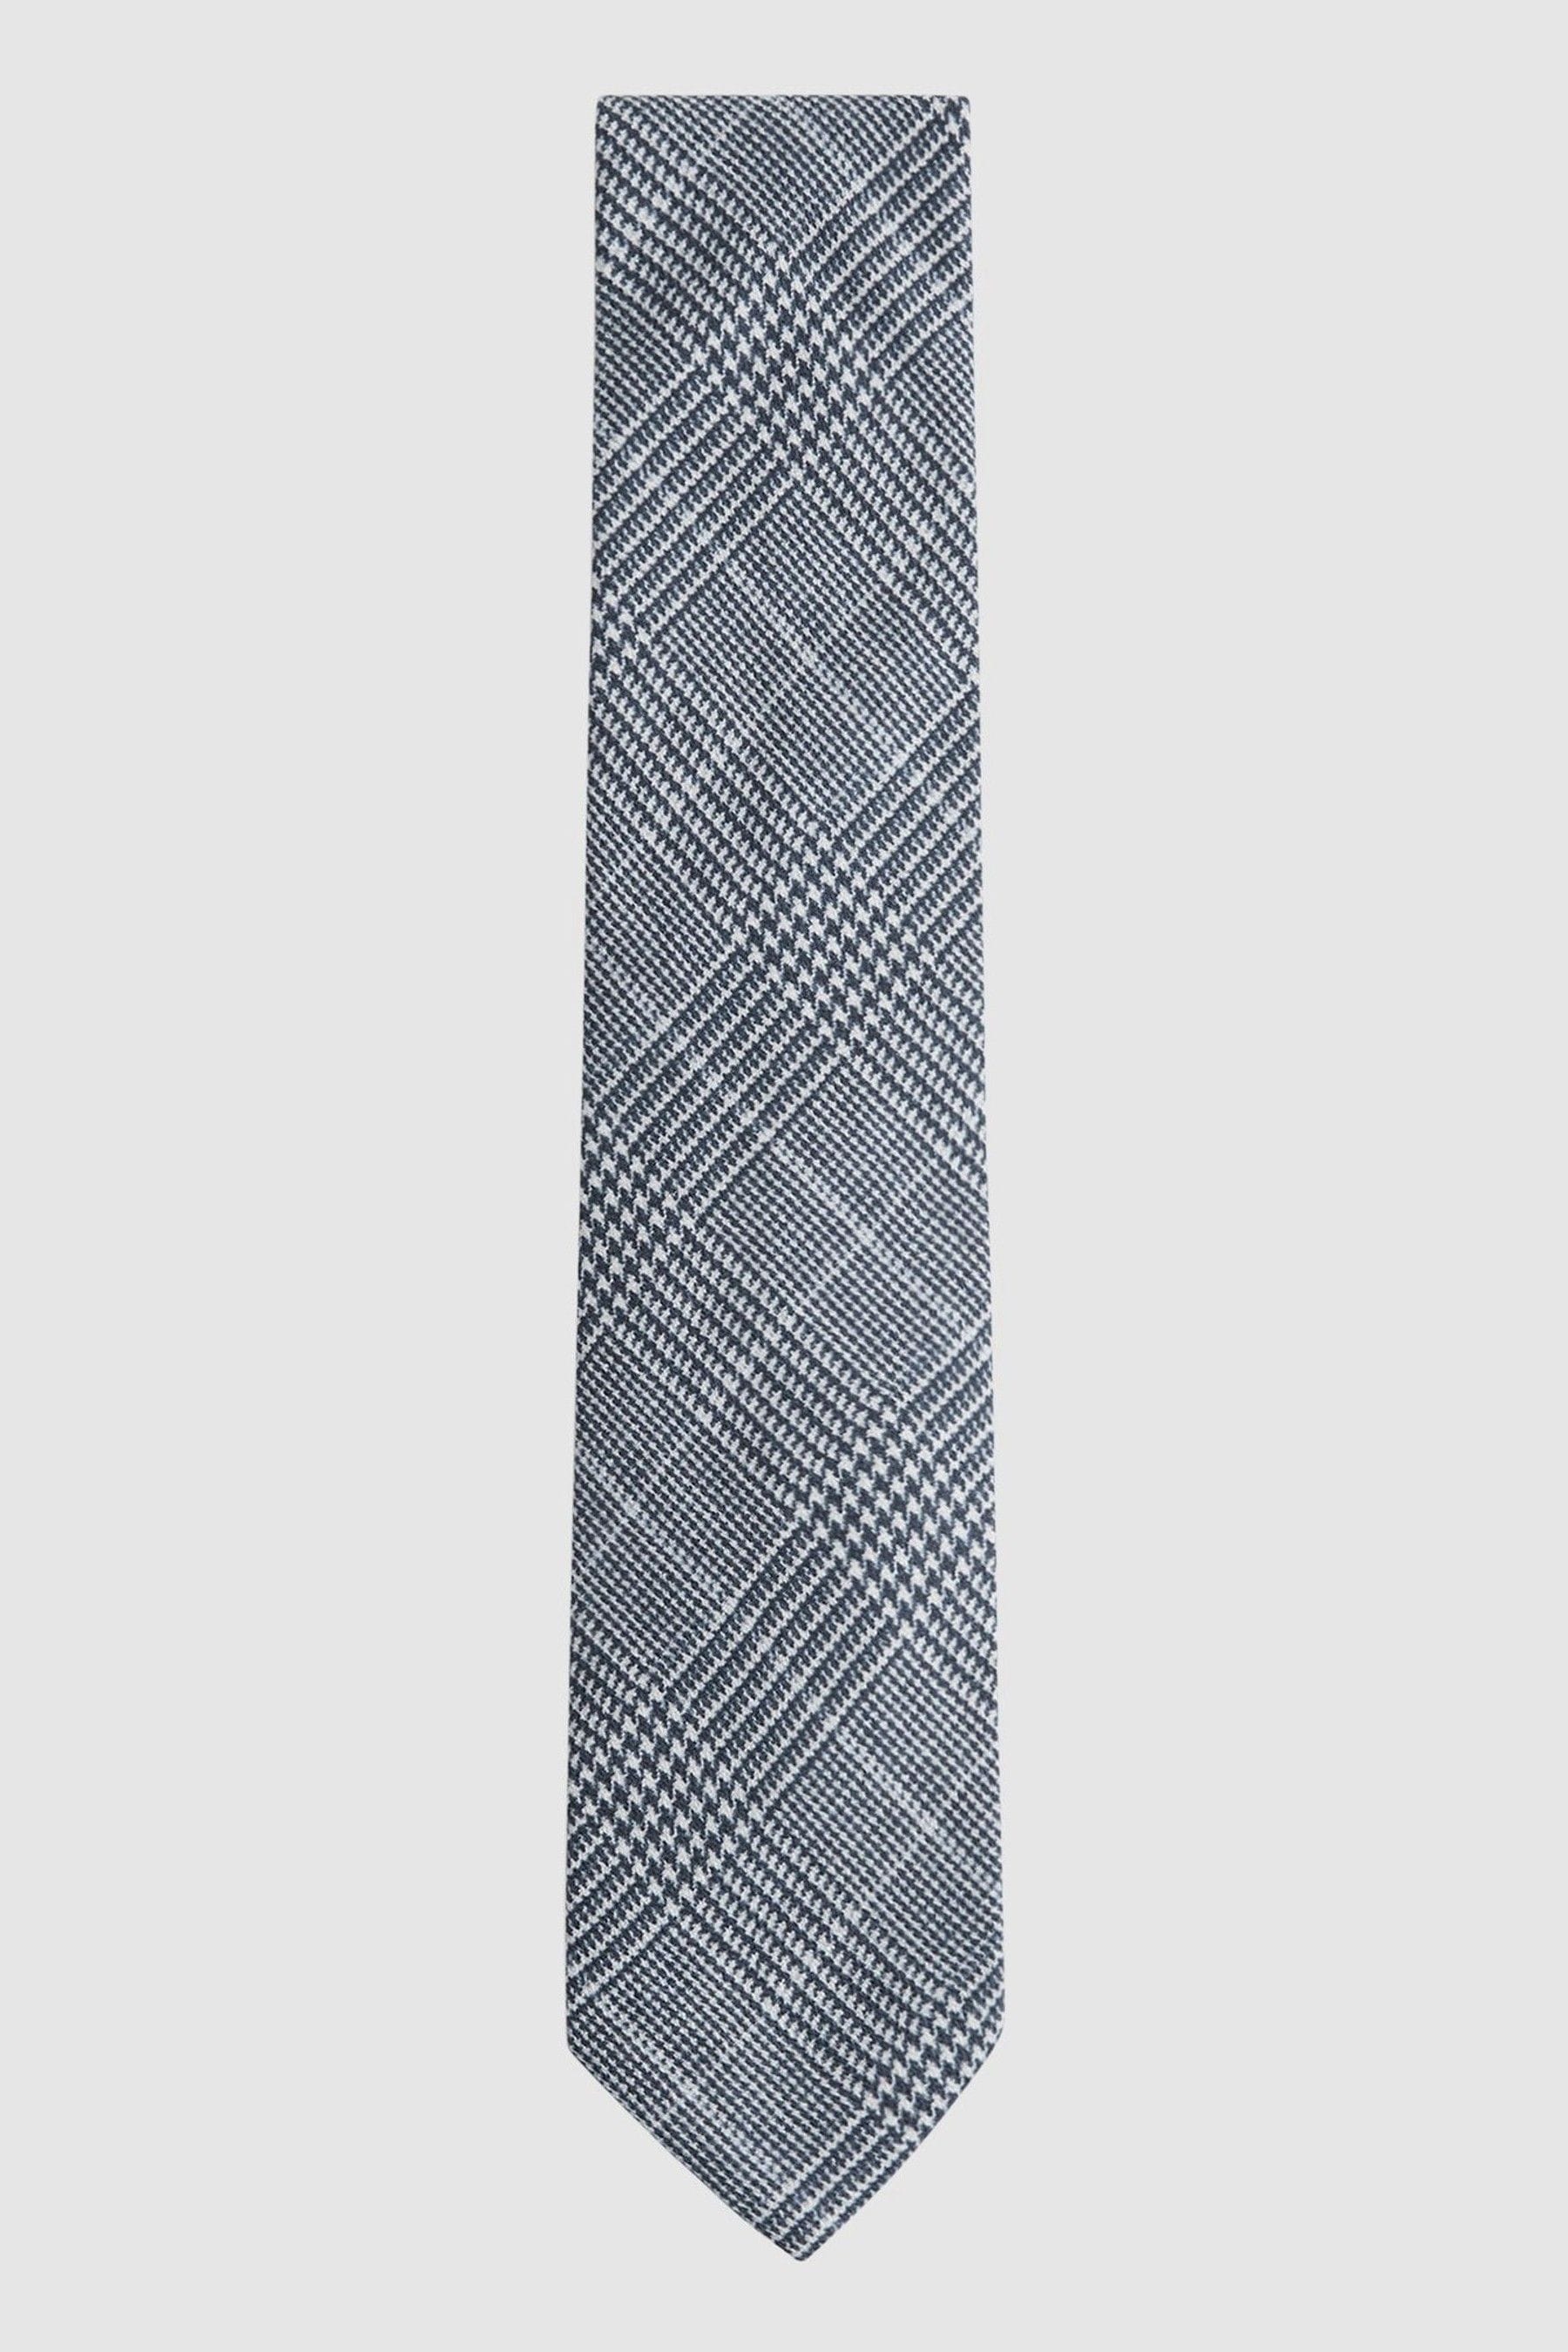 Reiss Tino - Airforce Blue Silk Prince Of Wales Check Tie, One